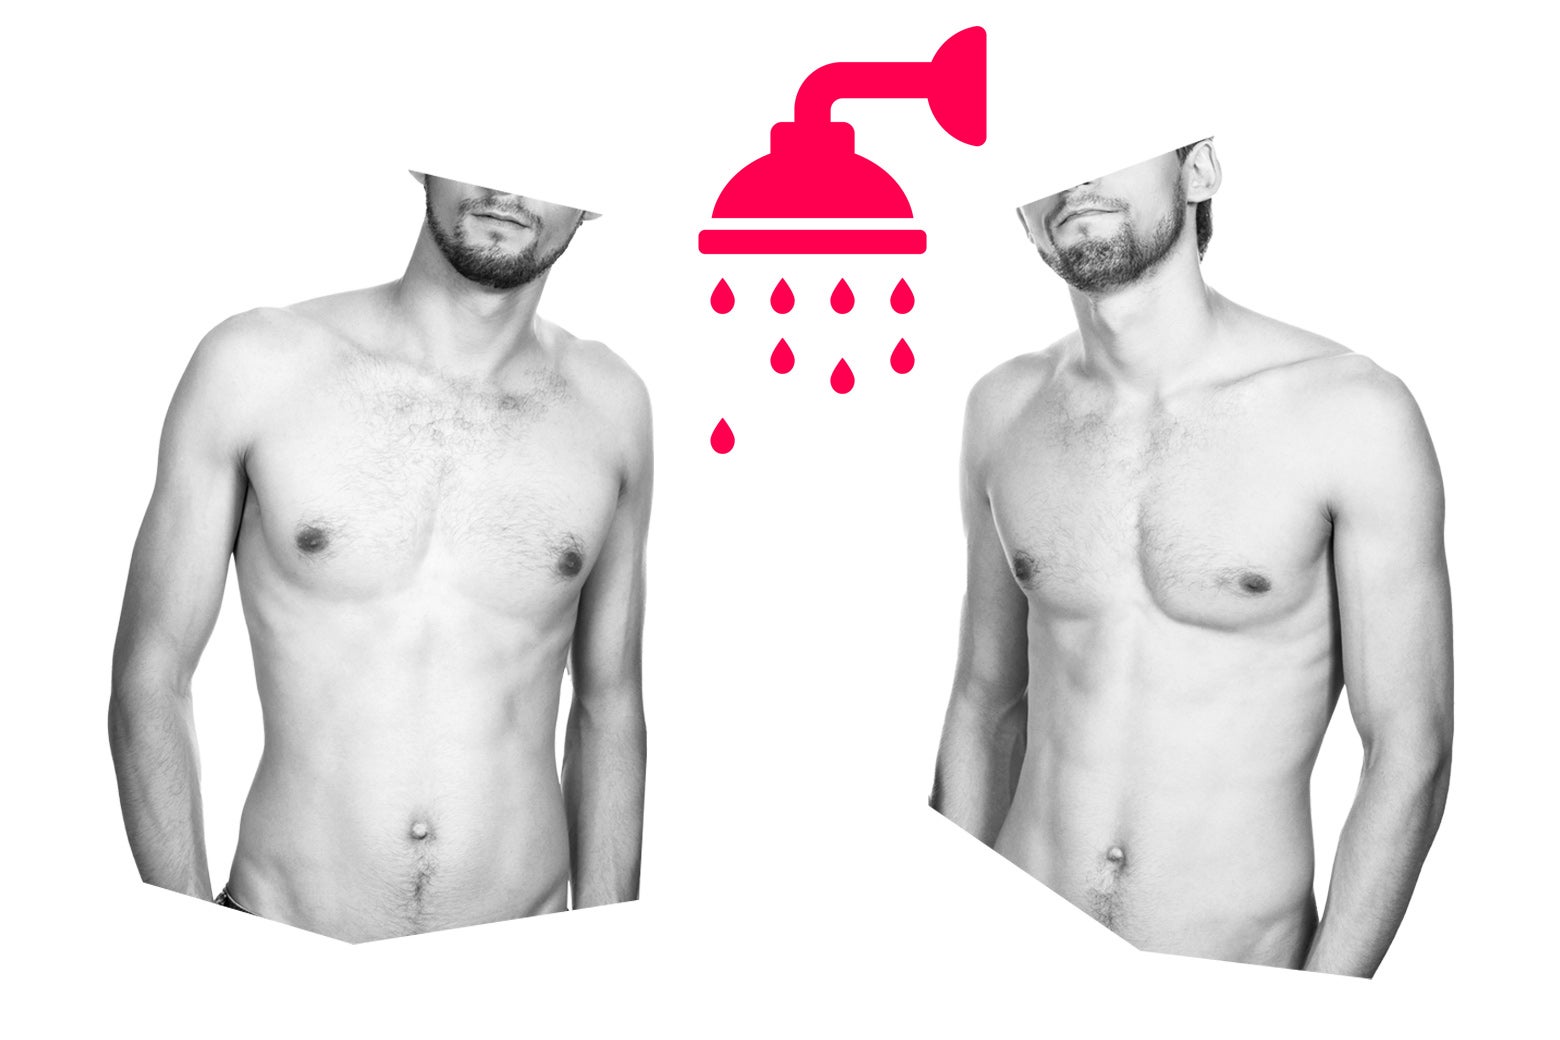 Two men standing next to each other under a showerhead.